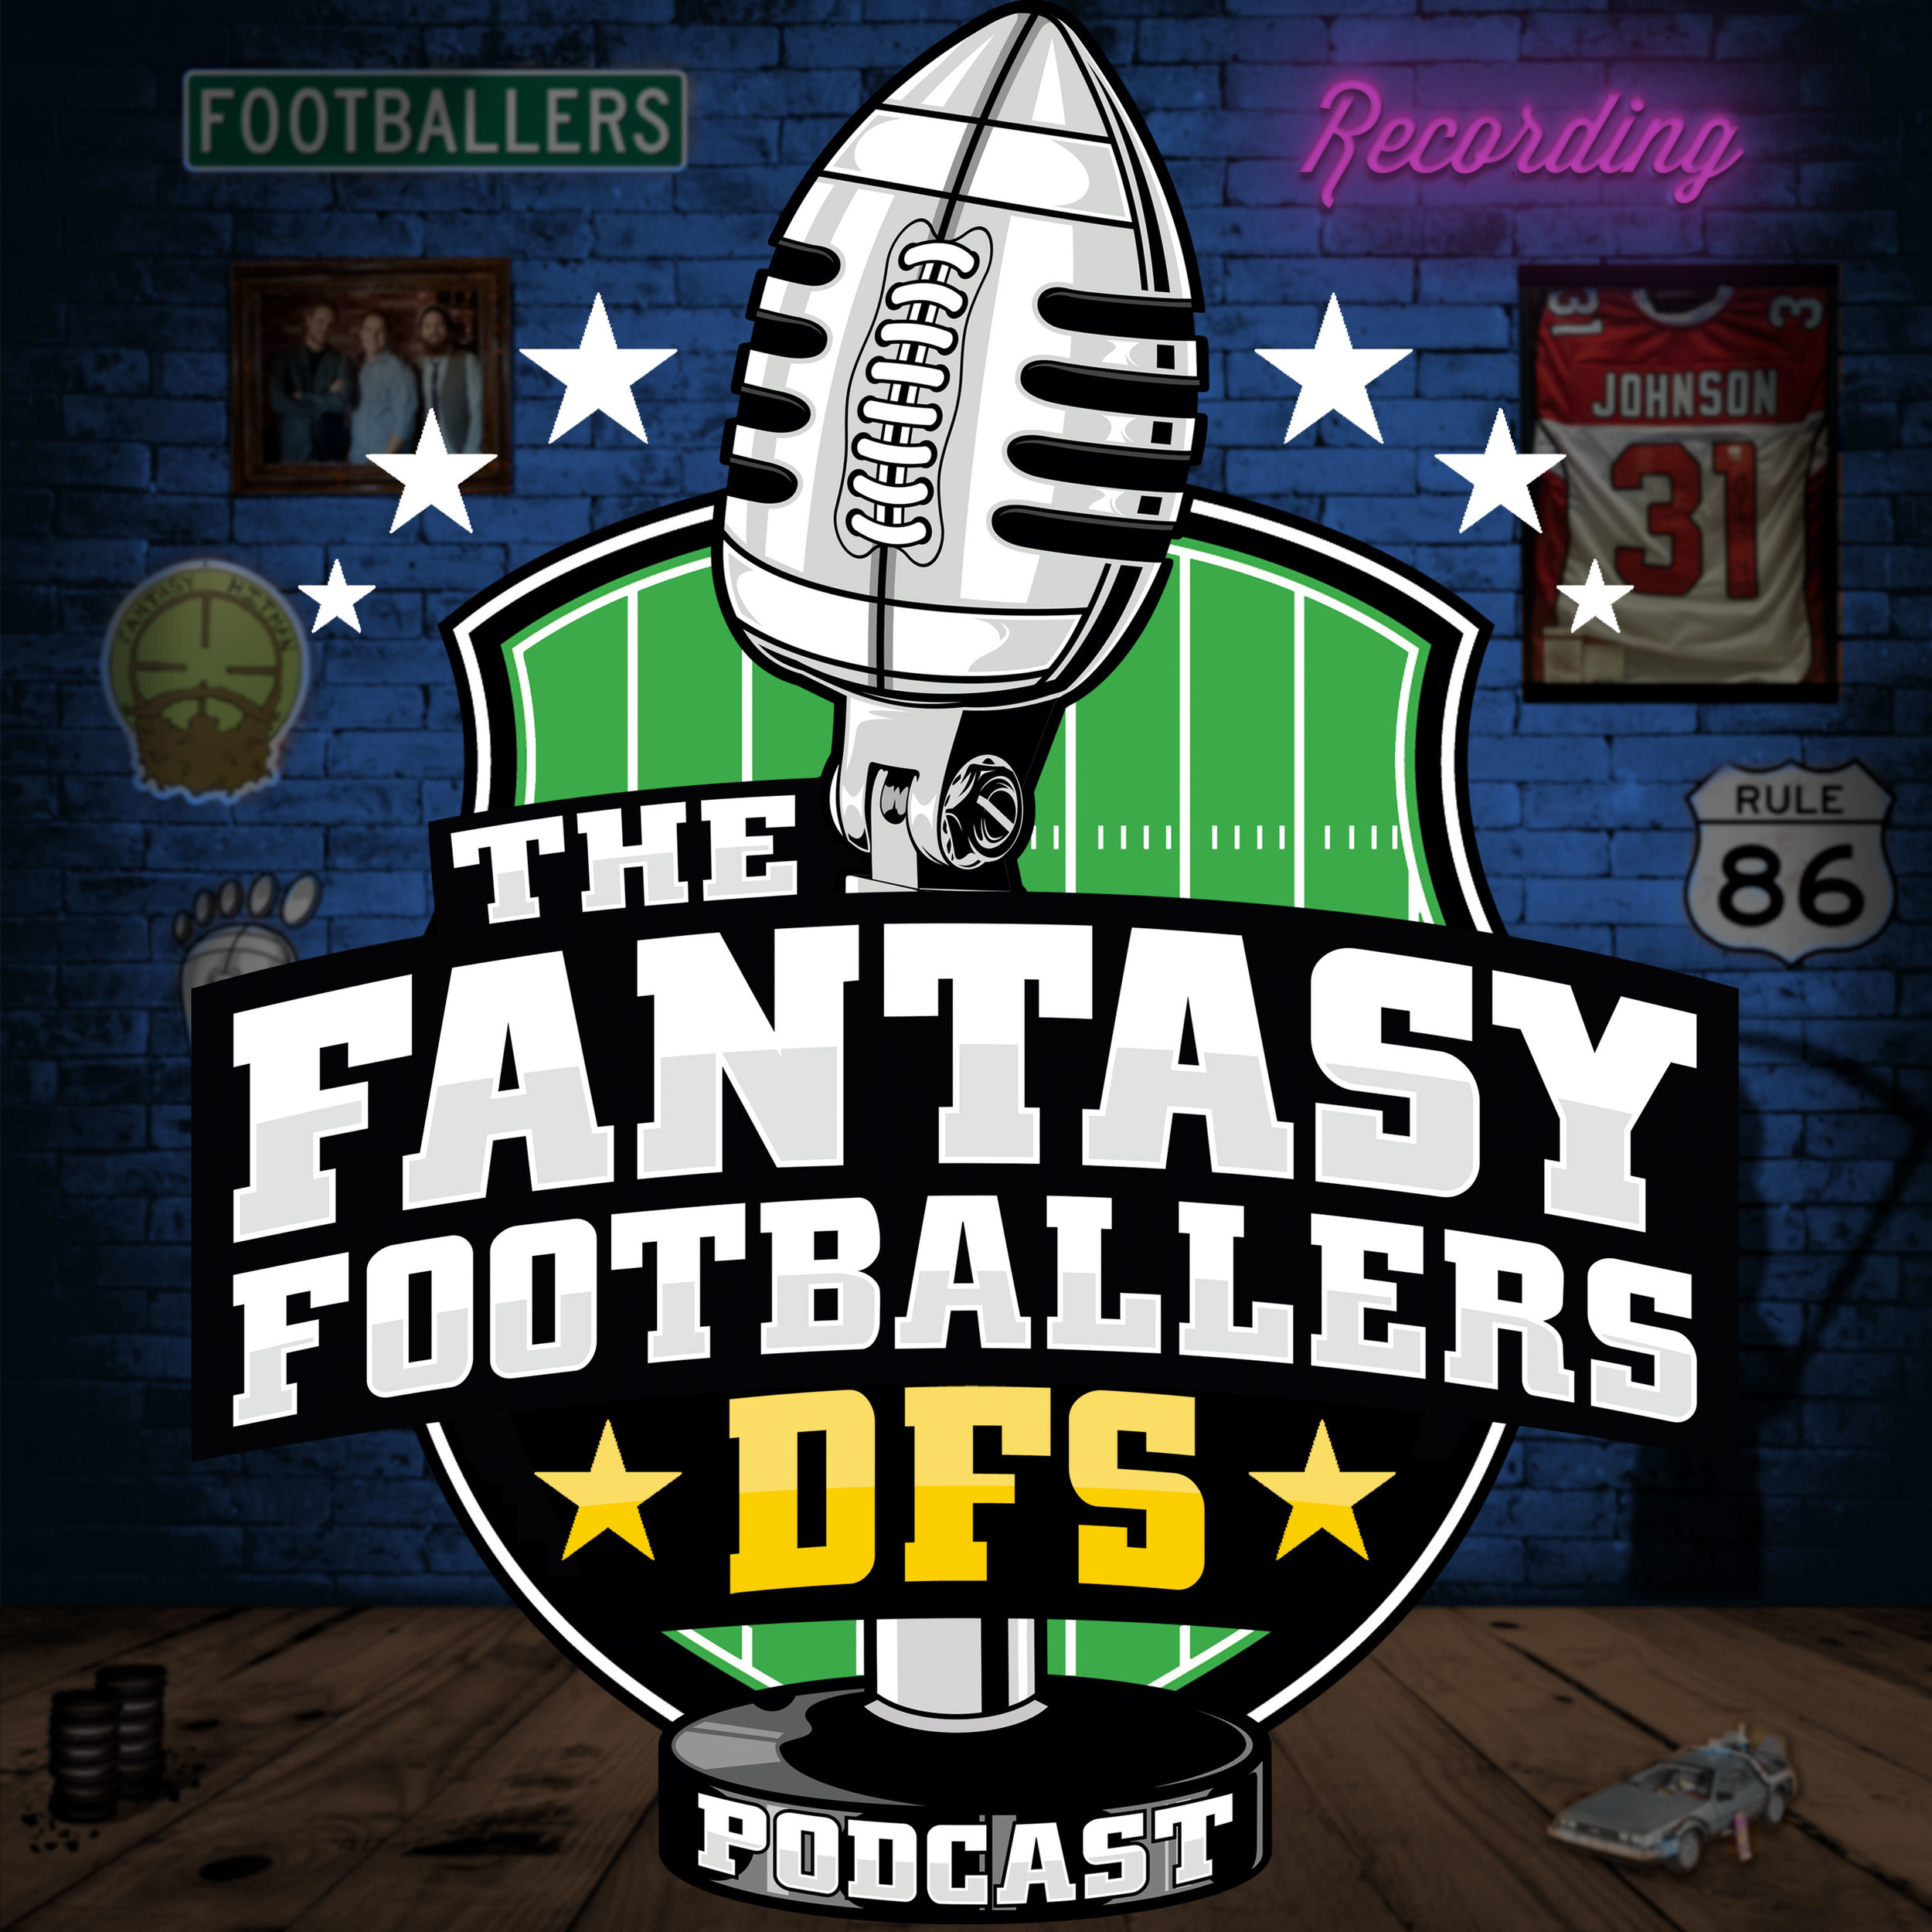 THE FANTASY FOOTBALLERS DFS PODCAST